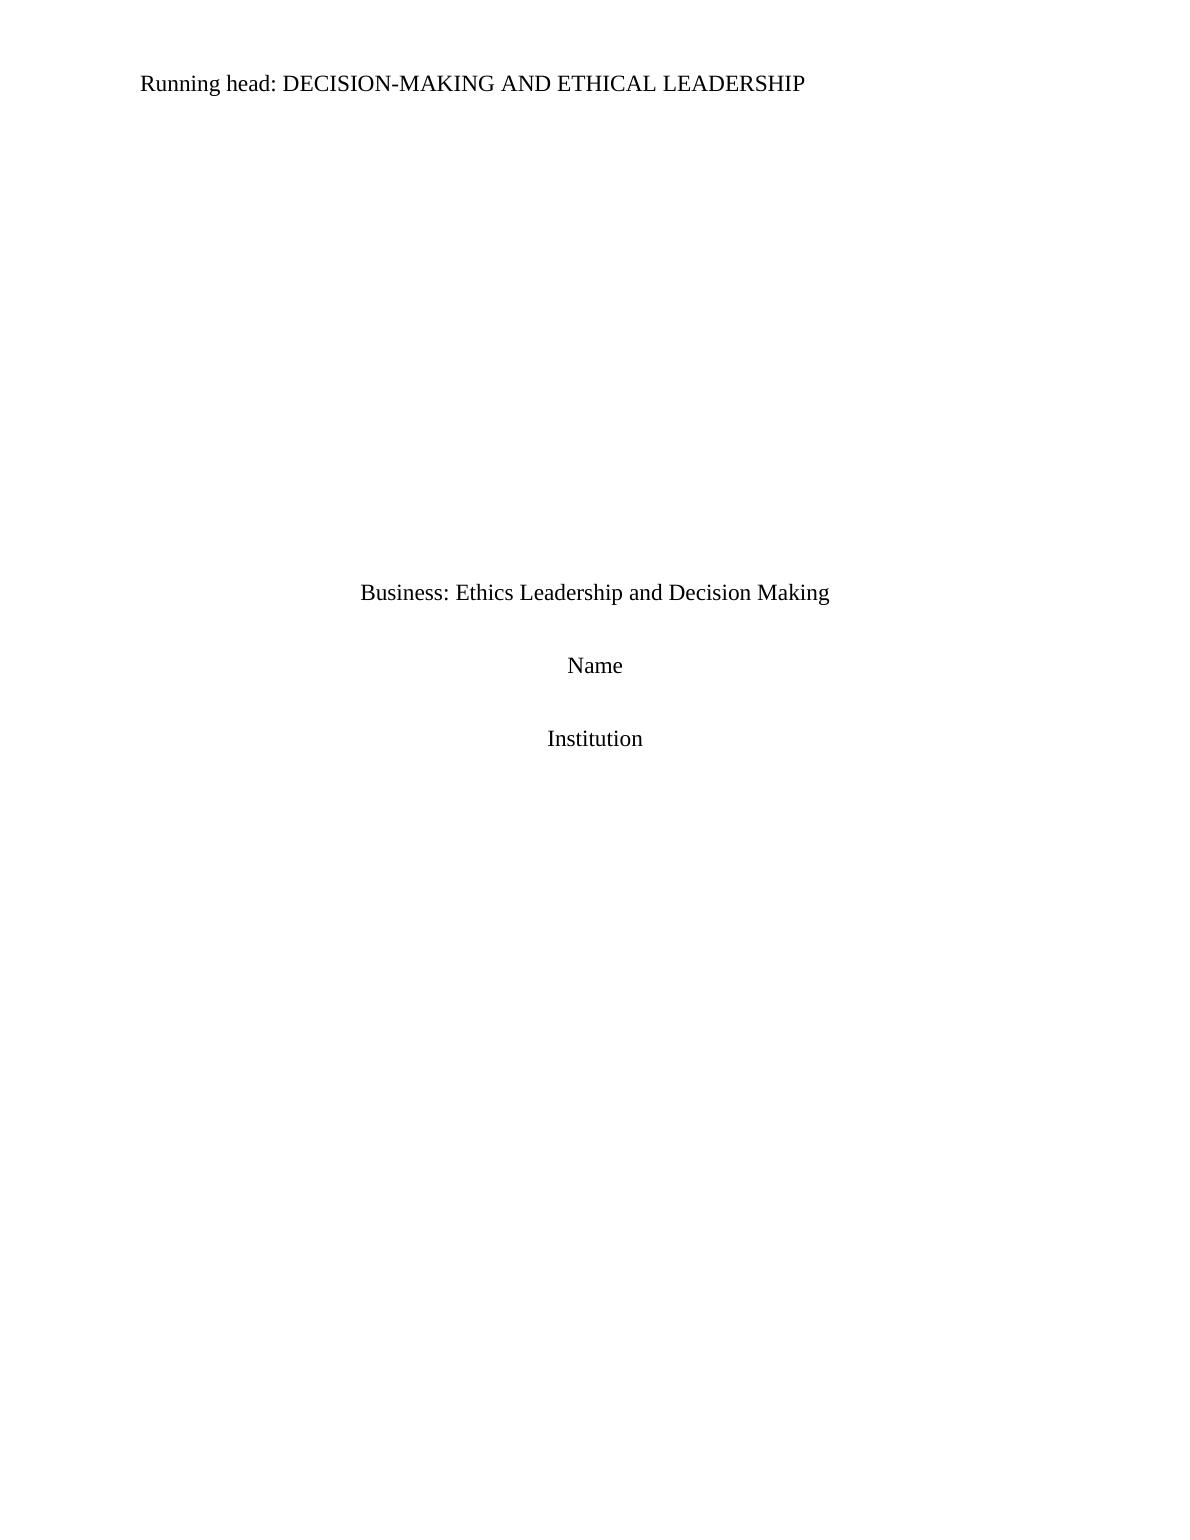 Ethics Leadership and Decision Making Assignment (Doc)_1